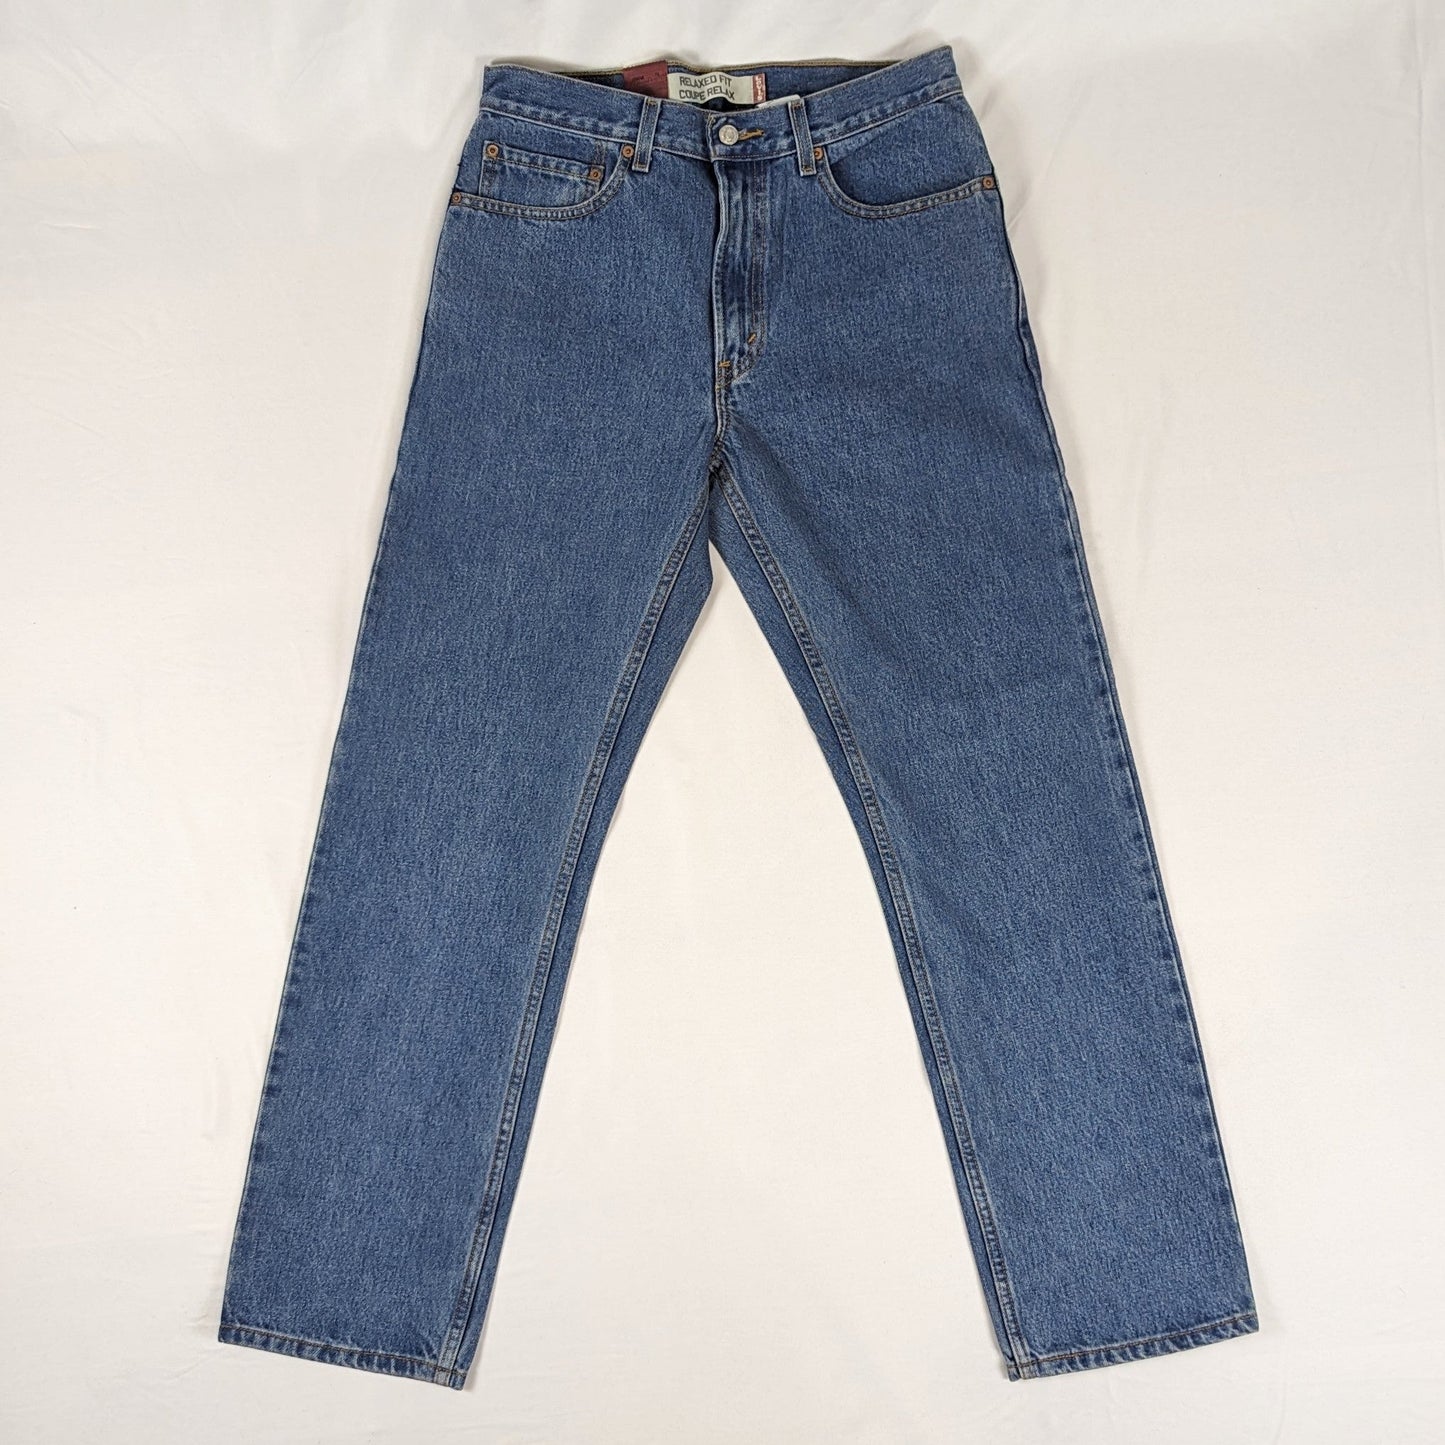 Levis jeans deadstock relaxed fit 550 thick cotton 2000s